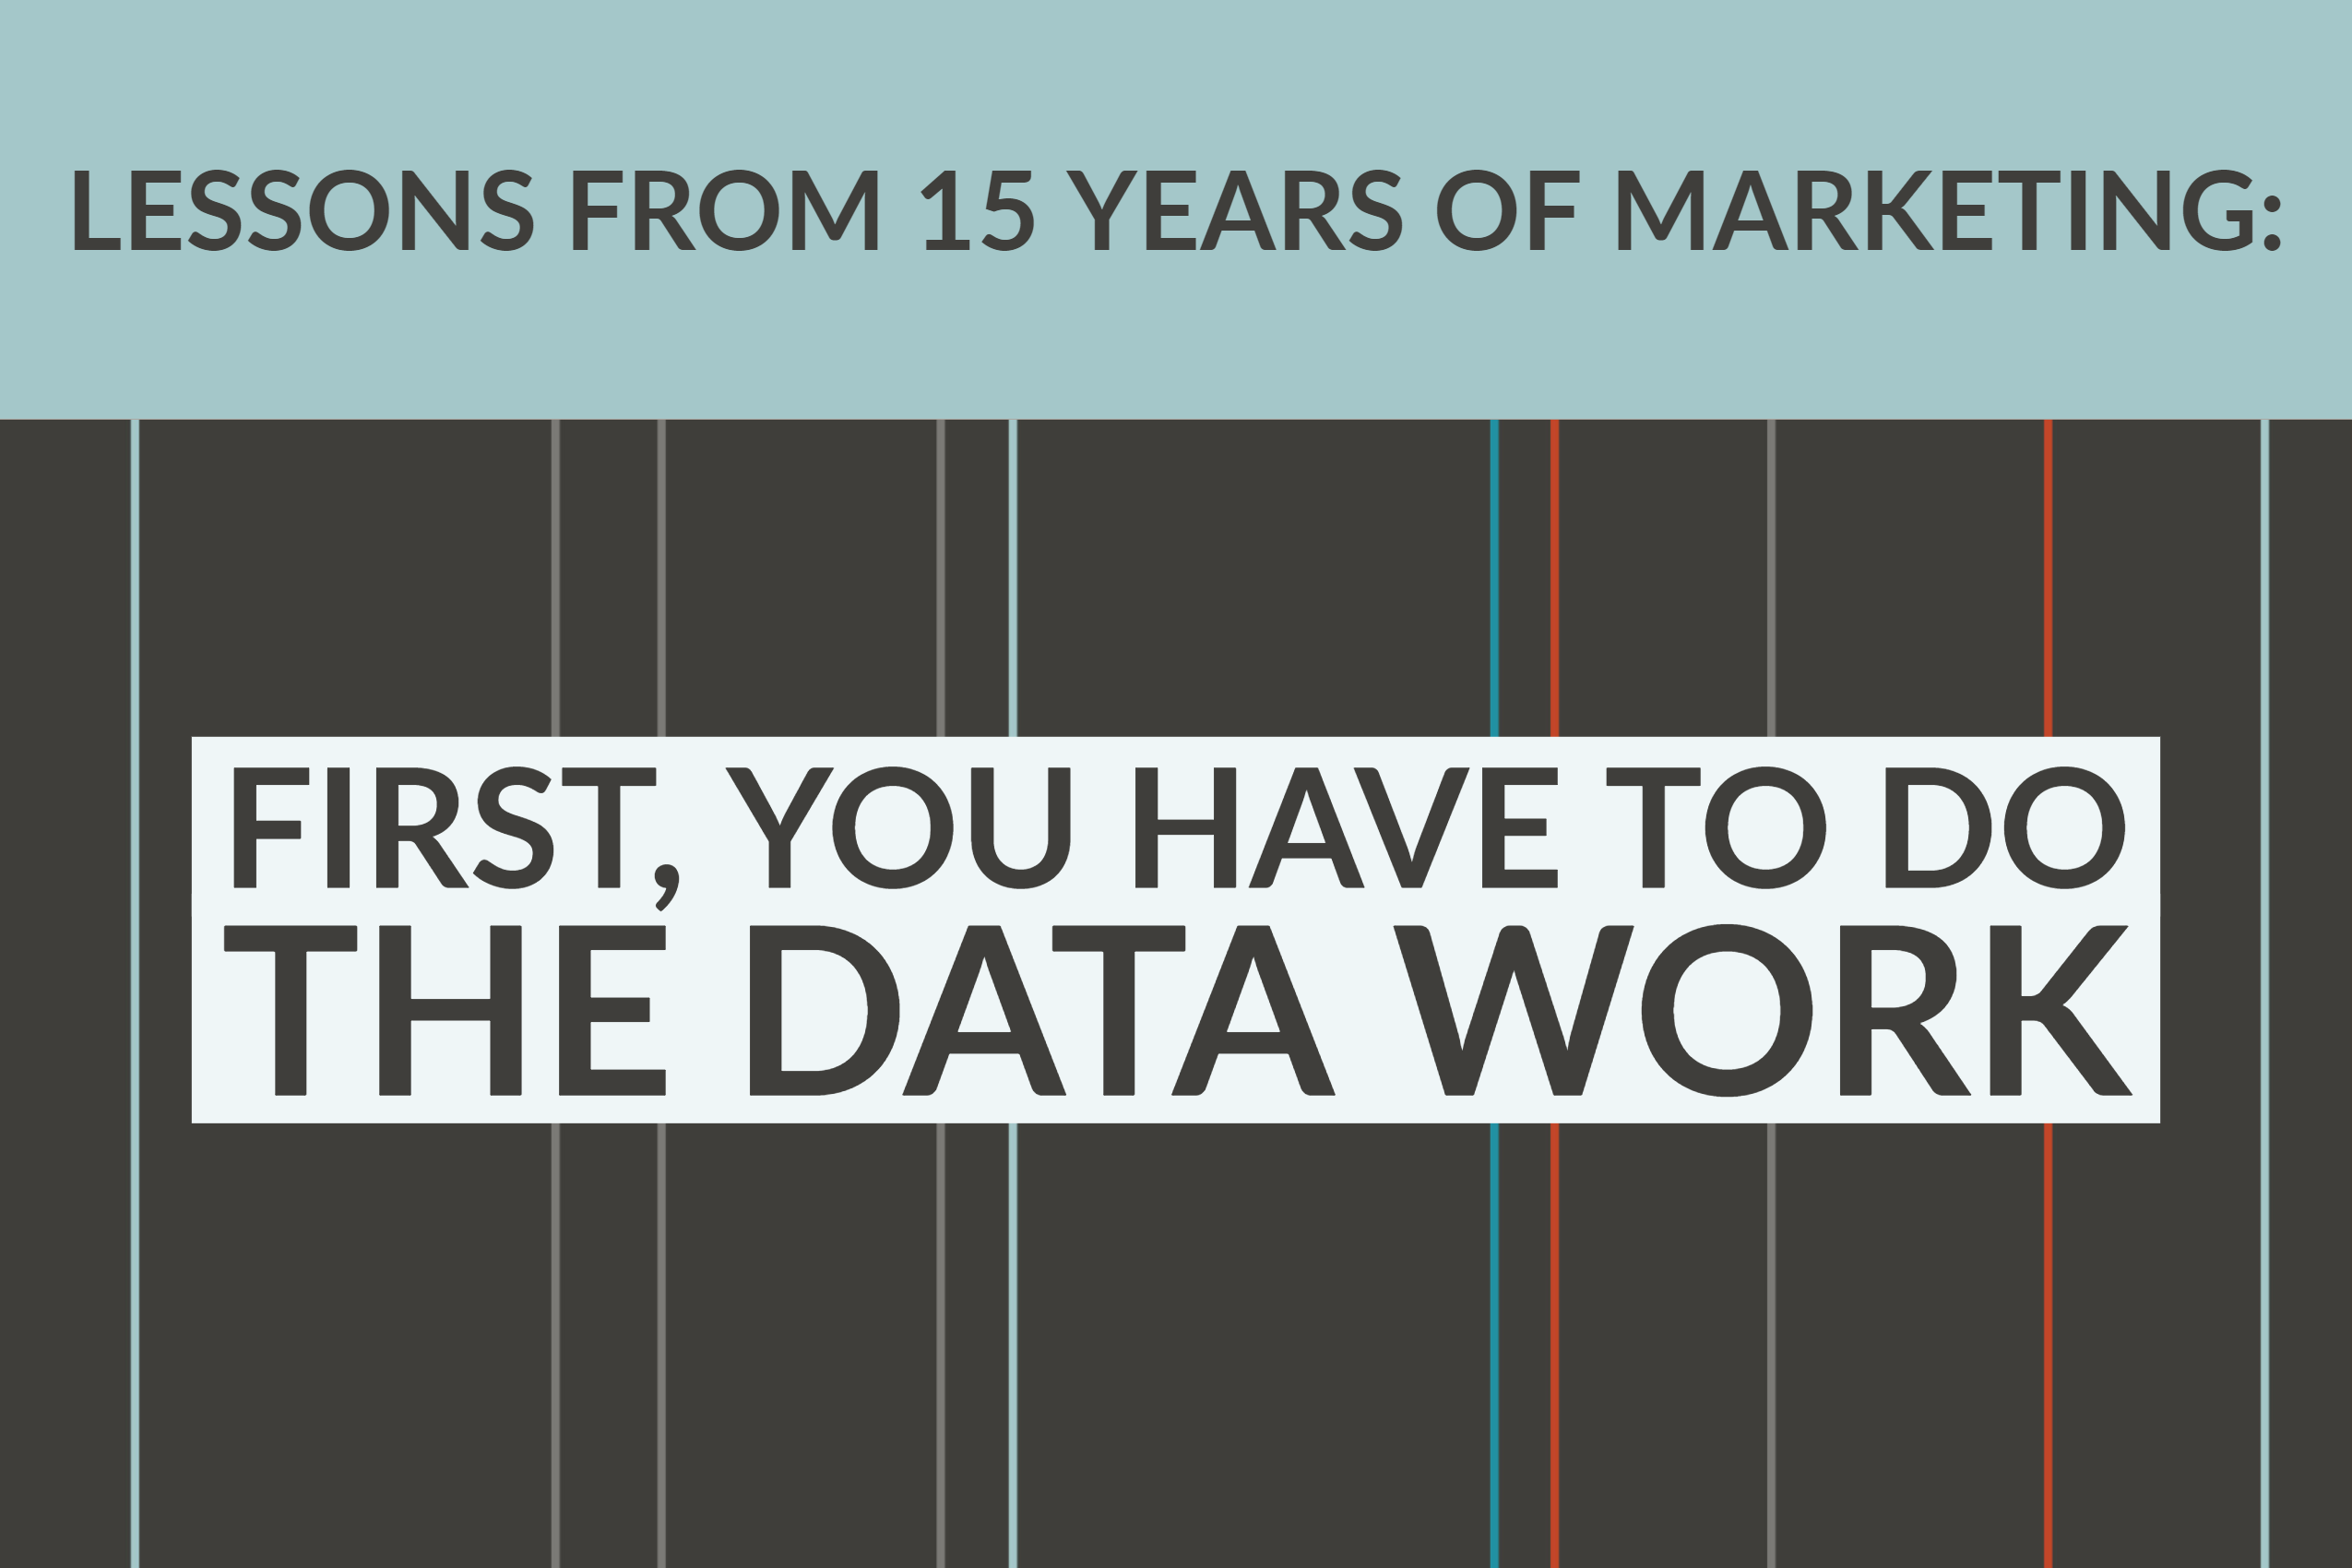 Lessons From 15 Years: First, You Have To Do The Data Work